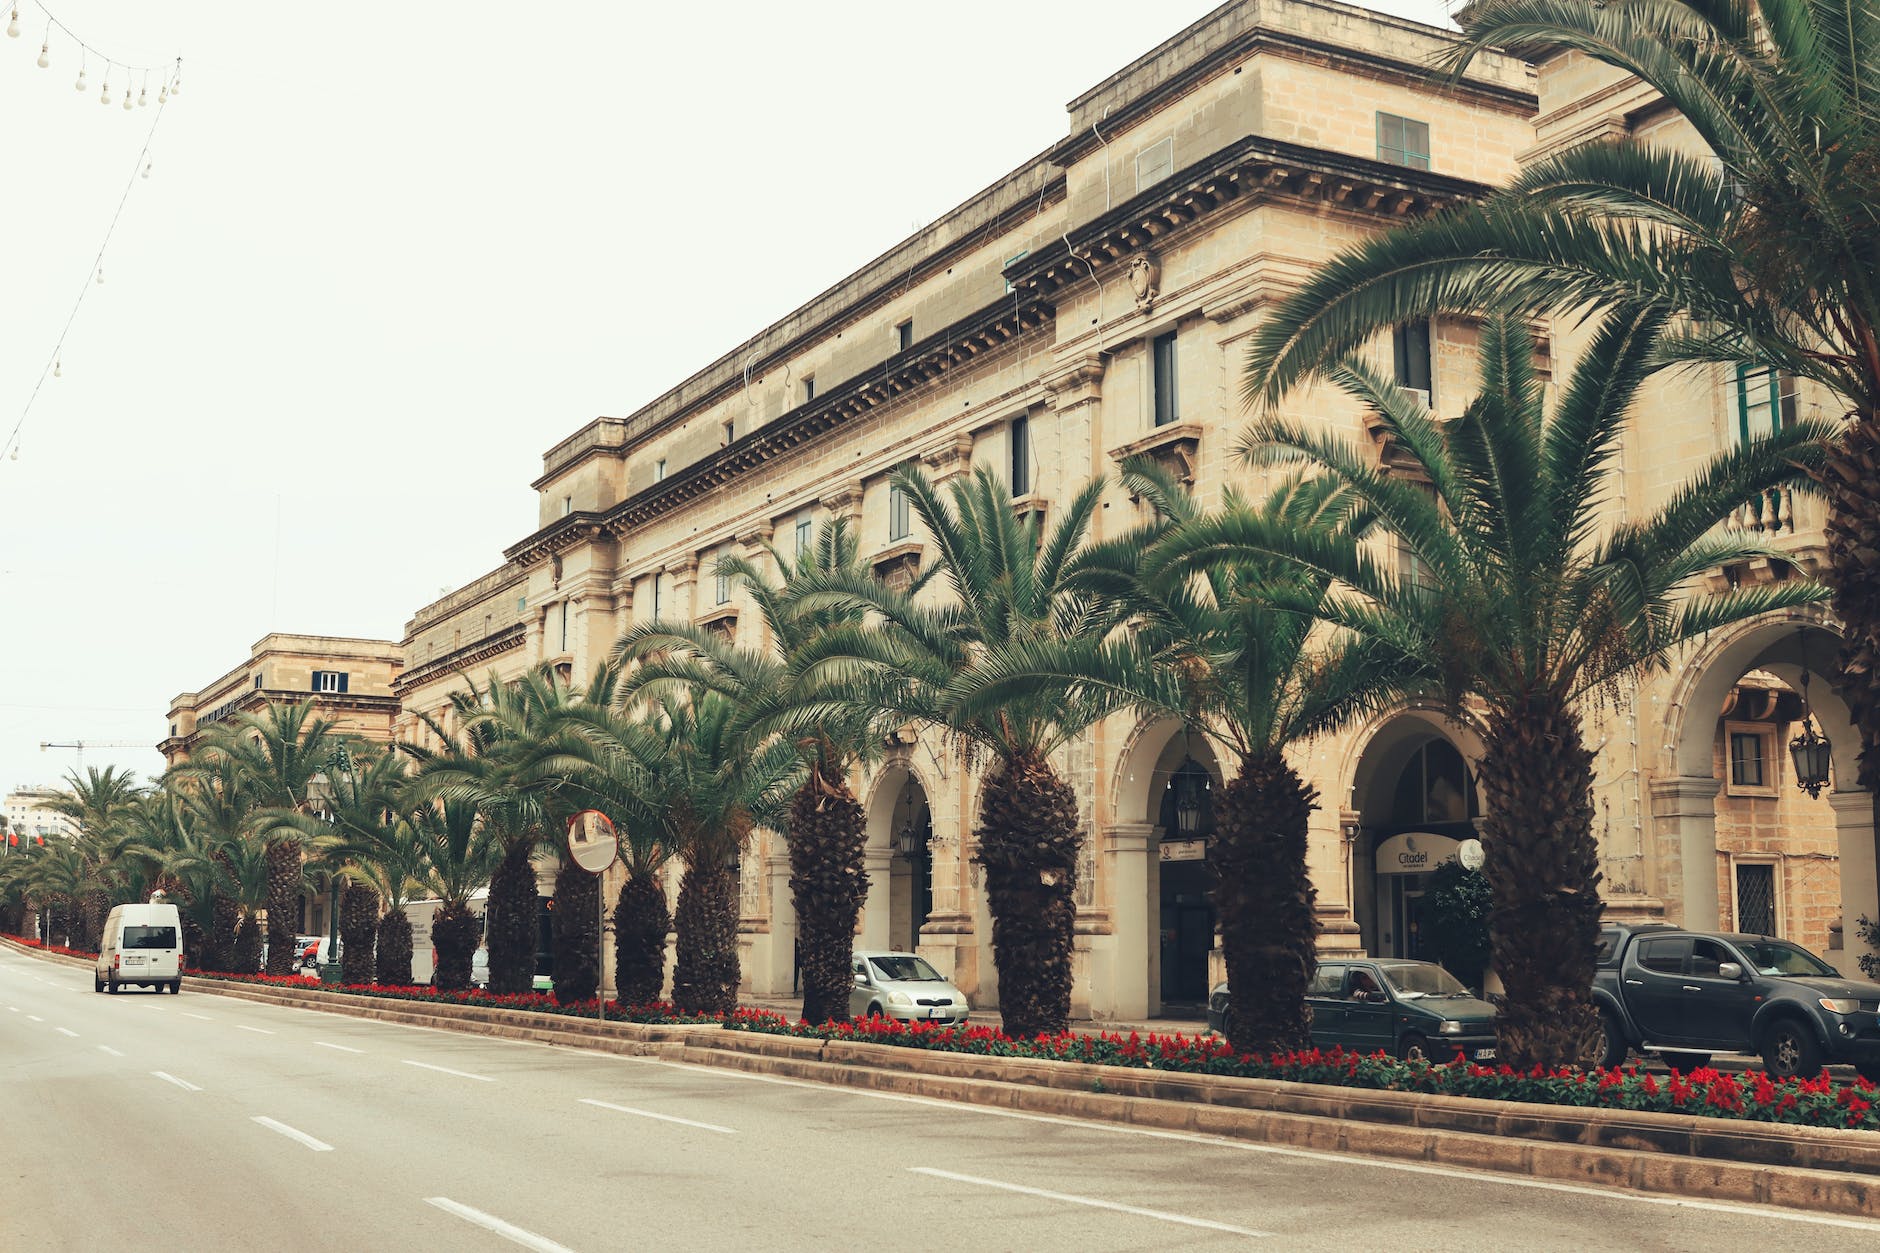 palm trees line the street in front of a building